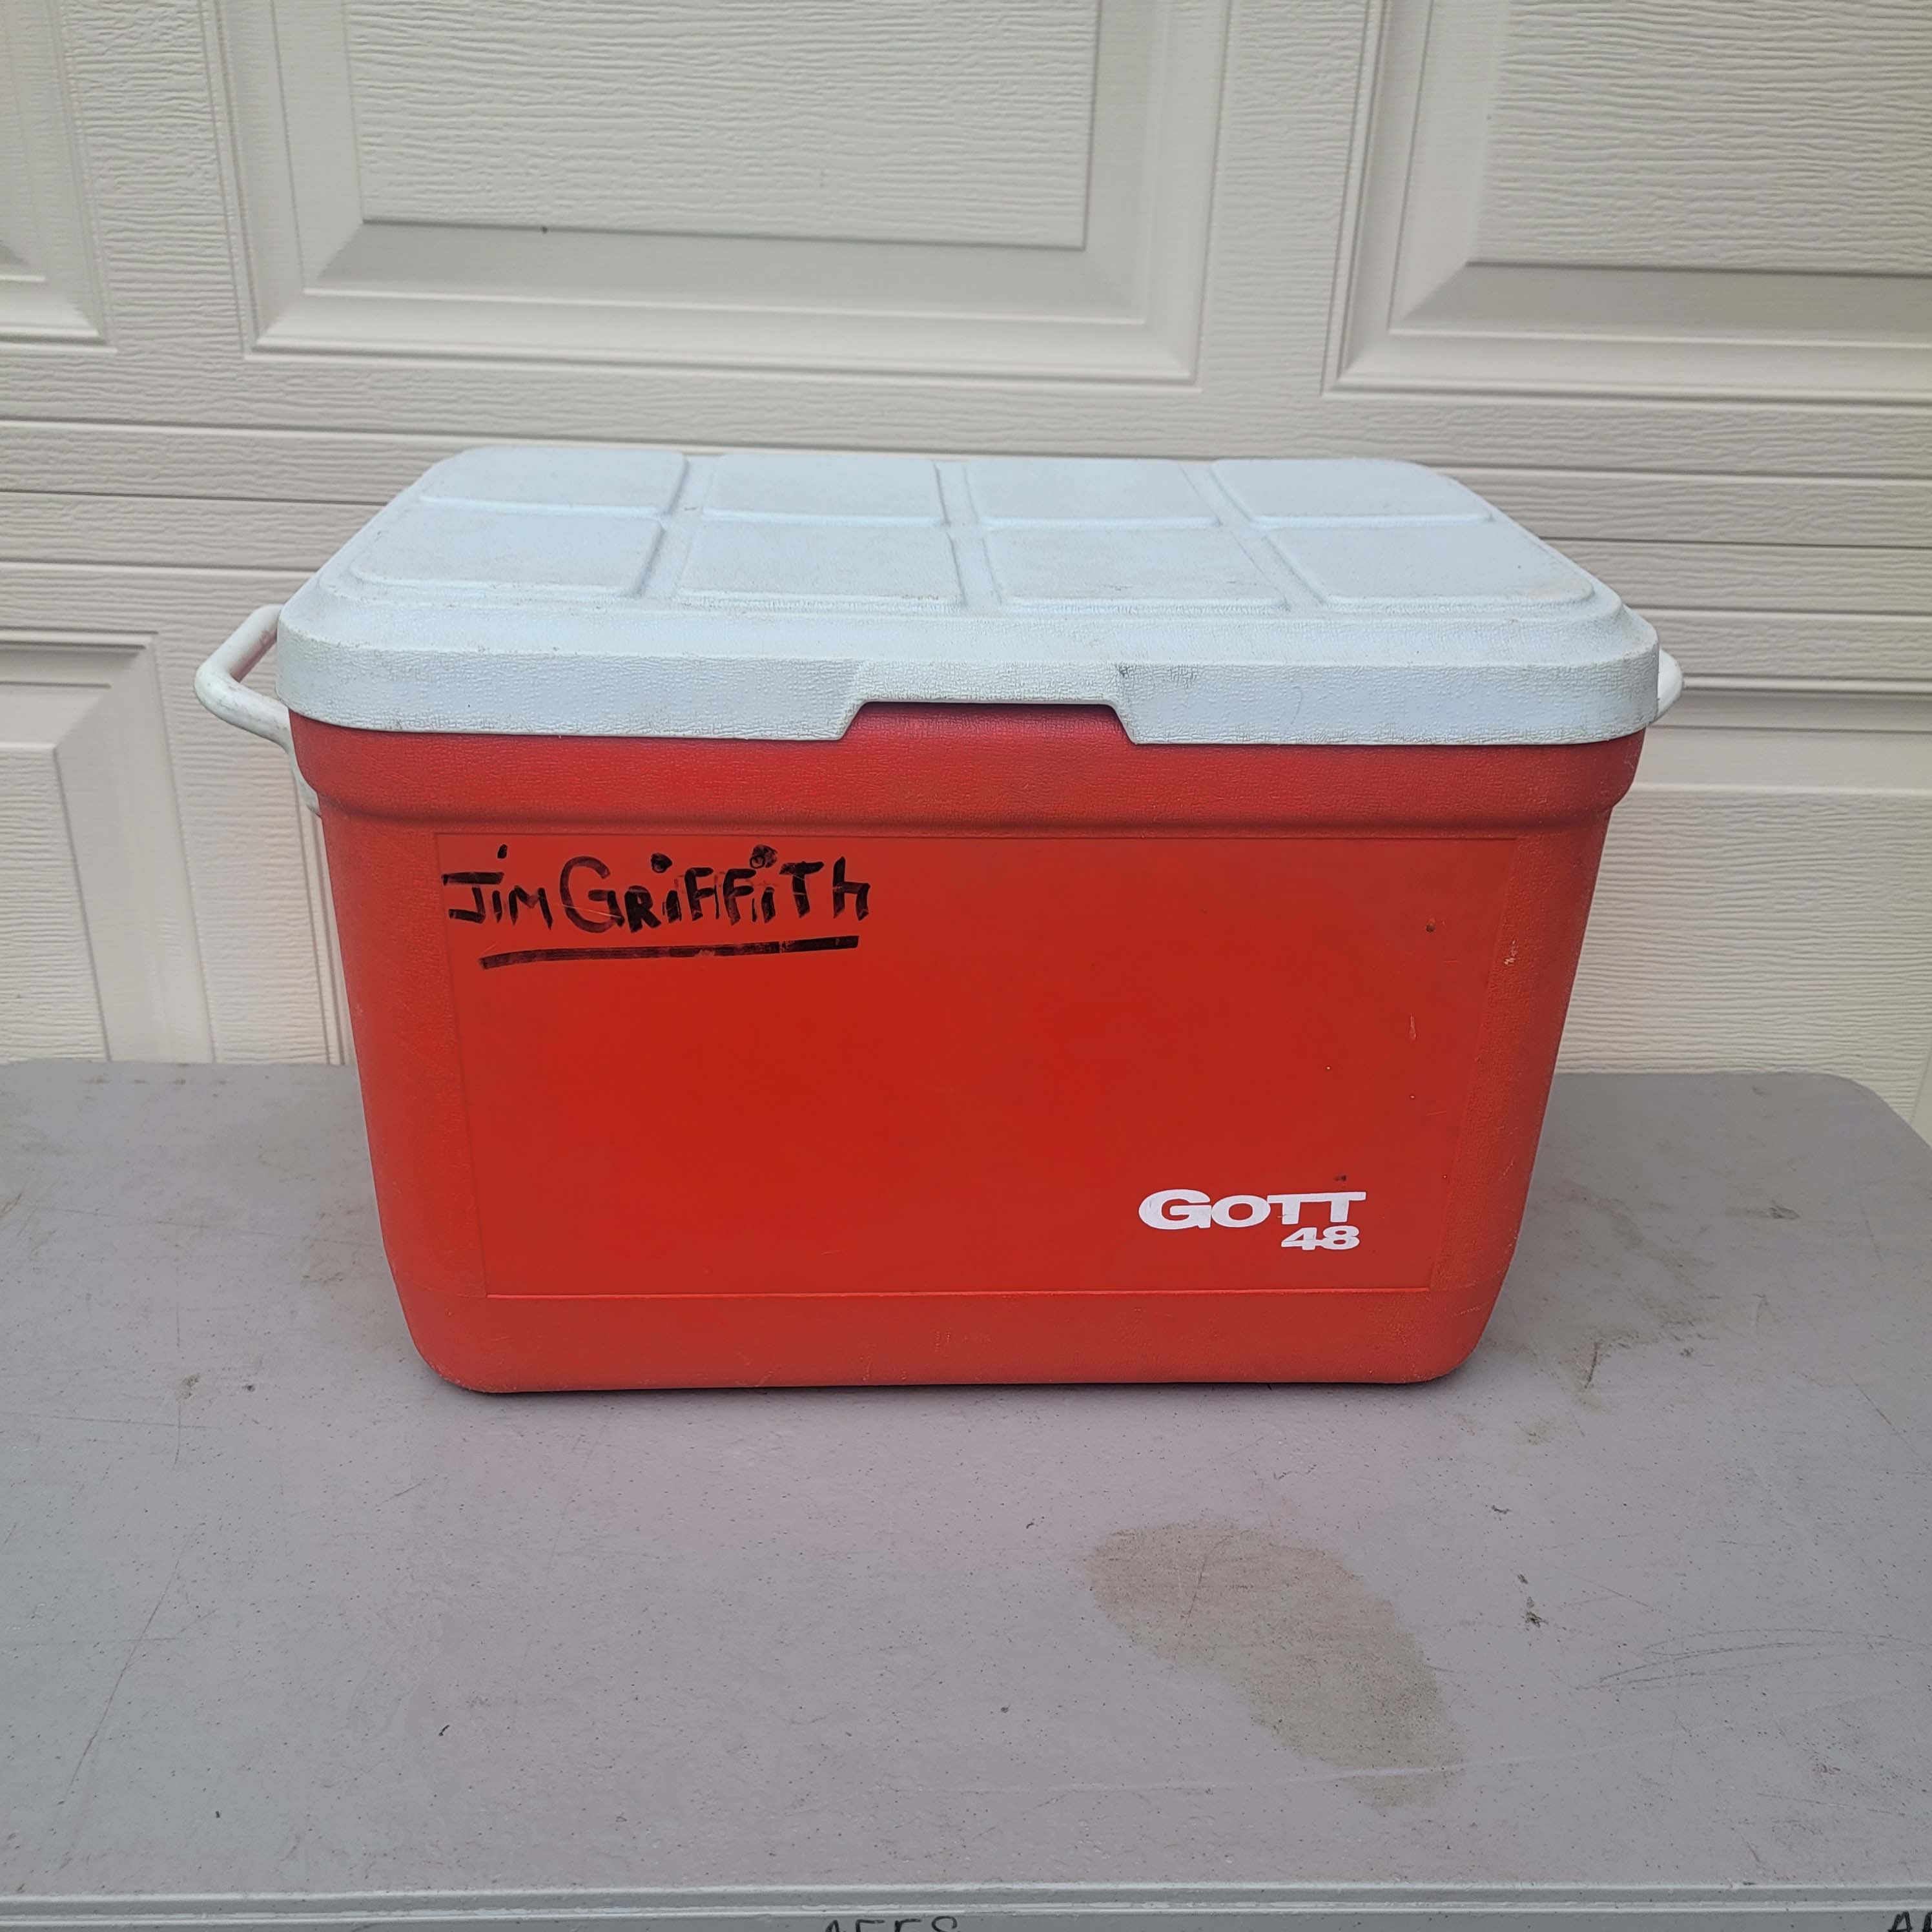 Vintage GOTT Ice Chest Model 1818 Hunting And Fishing Gott Cooler